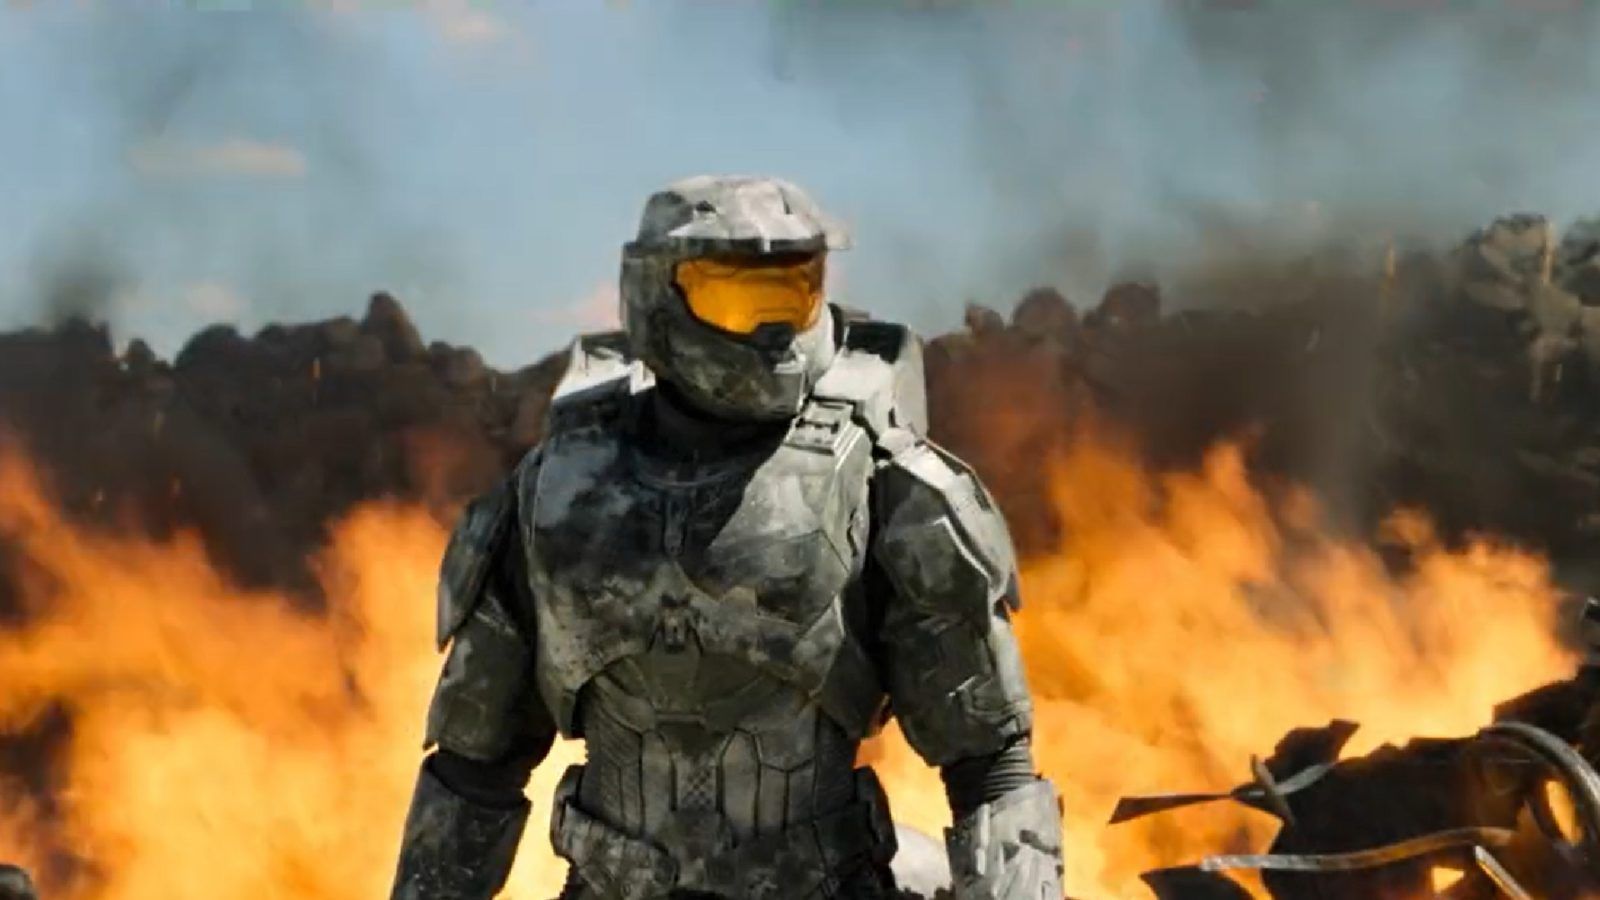 Halo' Trailer: TV Show's First Teaser Released From Paramount Plus